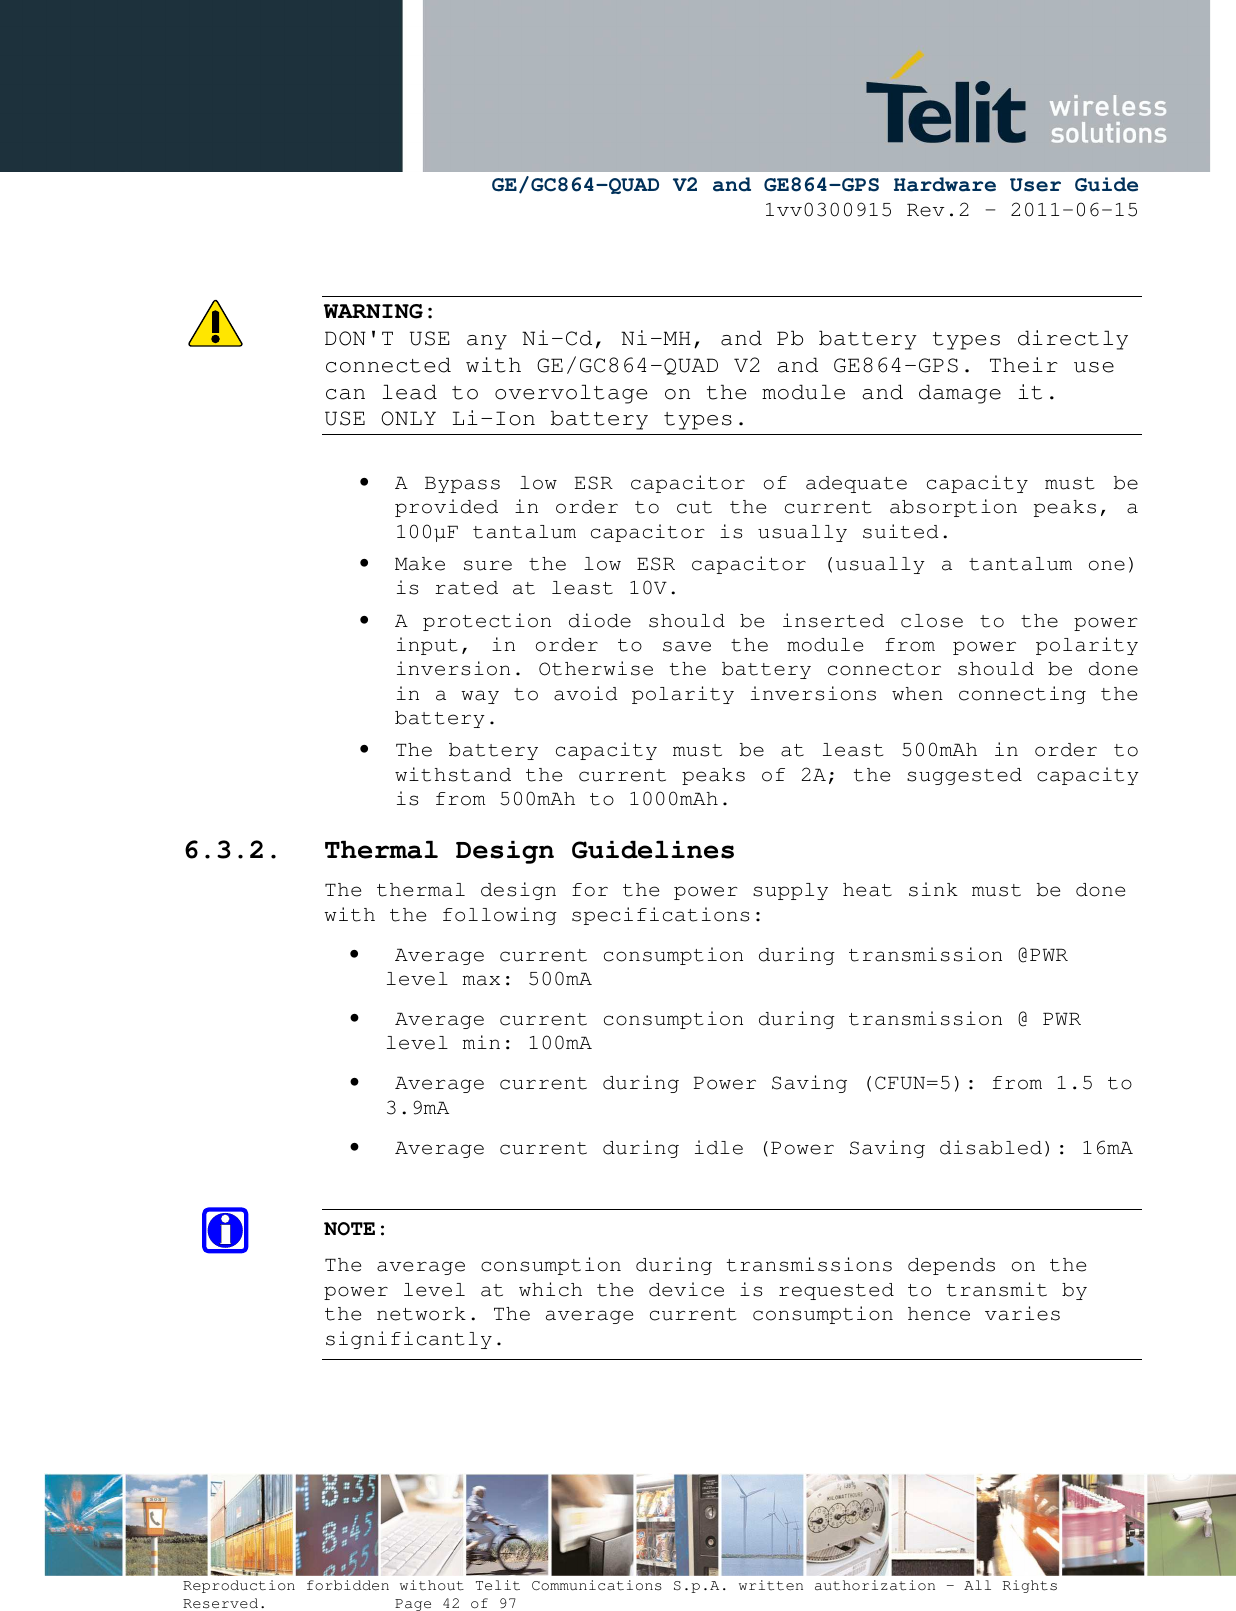      GE/GC864-QUAD V2 and GE864-GPS Hardware User Guide 1vv0300915 Rev.2 – 2011-06-15  Reproduction forbidden without Telit Communications S.p.A. written authorization - All Rights Reserved.    Page 42 of 97    WARNING:  DON&apos;T USE any Ni-Cd, Ni-MH, and Pb battery types directly connected with GE/GC864-QUAD V2 and GE864-GPS. Their use can lead to overvoltage on the module and damage it. USE ONLY Li-Ion battery types.  • A  Bypass  low  ESR  capacitor  of  adequate  capacity  must  be provided in order to cut the current absorption peaks, a 100µF tantalum capacitor is usually suited. • Make sure the low ESR capacitor (usually a tantalum one) is rated at least 10V. • A protection diode should be inserted close to the power input,  in  order  to  save  the  module  from  power  polarity inversion. Otherwise the battery connector should be done in a way to avoid polarity inversions when connecting the battery. • The battery capacity must be at least 500mAh in order to withstand the current peaks of 2A; the suggested capacity is from 500mAh to 1000mAh. 6.3.2. Thermal Design Guidelines The thermal design for the power supply heat sink must be done with the following specifications: • Average current consumption during transmission @PWR level max: 500mA • Average current consumption during transmission @ PWR level min: 100mA  • Average current during Power Saving (CFUN=5): from 1.5 to 3.9mA • Average current during idle (Power Saving disabled): 16mA  NOTE: The average consumption during transmissions depends on the power level at which the device is requested to transmit by the network. The average current consumption hence varies significantly.  